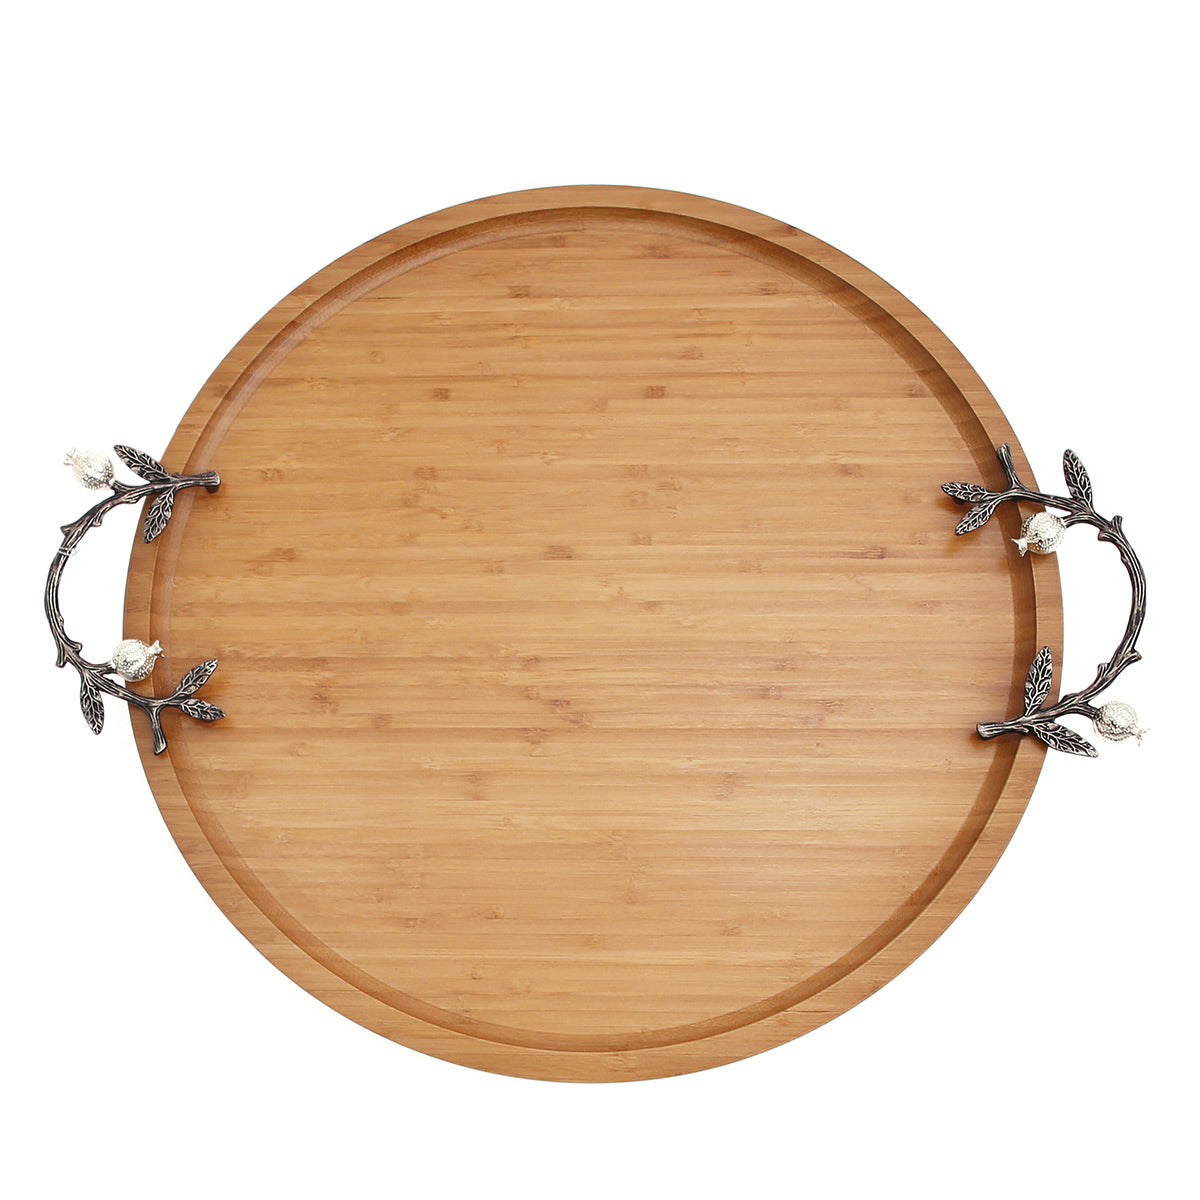 Round Tray Wood Sml ORCHID WB1060 (Copy)